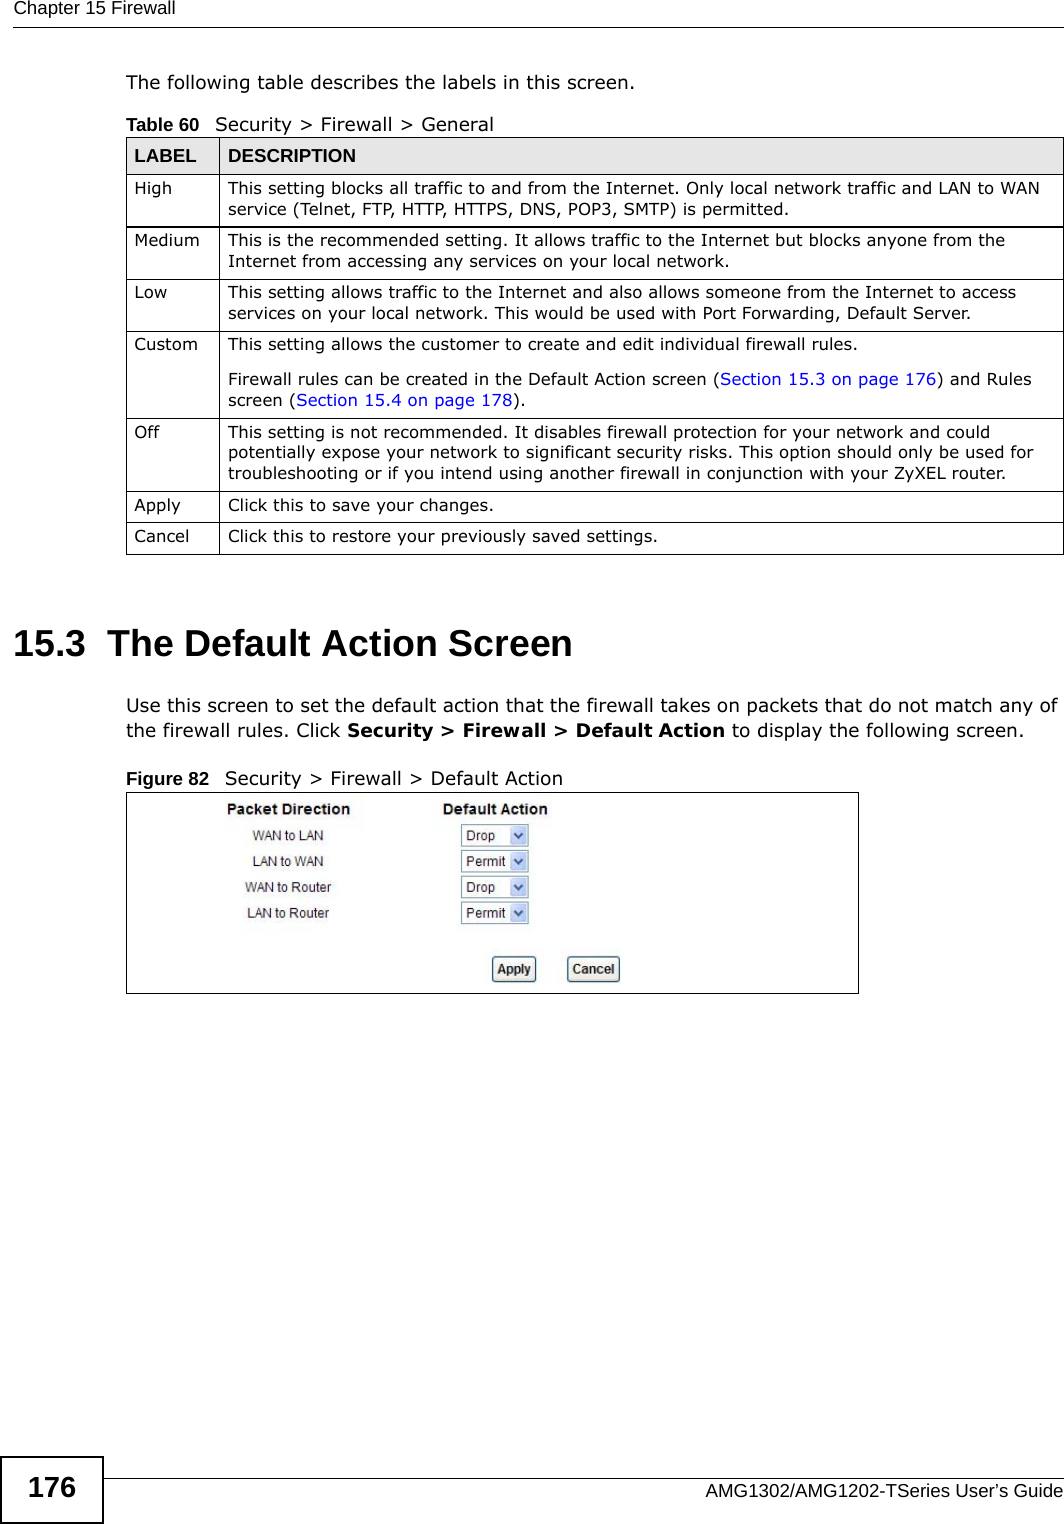 Chapter 15 FirewallAMG1302/AMG1202-TSeries User’s Guide176The following table describes the labels in this screen.15.3  The Default Action ScreenUse this screen to set the default action that the firewall takes on packets that do not match any of the firewall rules. Click Security &gt; Firewall &gt; Default Action to display the following screen.Figure 82   Security &gt; Firewall &gt; Default Action Table 60   Security &gt; Firewall &gt; GeneralLABEL DESCRIPTIONHigh This setting blocks all traffic to and from the Internet. Only local network traffic and LAN to WAN service (Telnet, FTP, HTTP, HTTPS, DNS, POP3, SMTP) is permitted. Medium This is the recommended setting. It allows traffic to the Internet but blocks anyone from the Internet from accessing any services on your local network. Low This setting allows traffic to the Internet and also allows someone from the Internet to access services on your local network. This would be used with Port Forwarding, Default Server. Custom This setting allows the customer to create and edit individual firewall rules. Firewall rules can be created in the Default Action screen (Section 15.3 on page 176) and Rules screen (Section 15.4 on page 178).Off This setting is not recommended. It disables firewall protection for your network and could potentially expose your network to significant security risks. This option should only be used for troubleshooting or if you intend using another firewall in conjunction with your ZyXEL router.Apply Click this to save your changes.Cancel Click this to restore your previously saved settings.